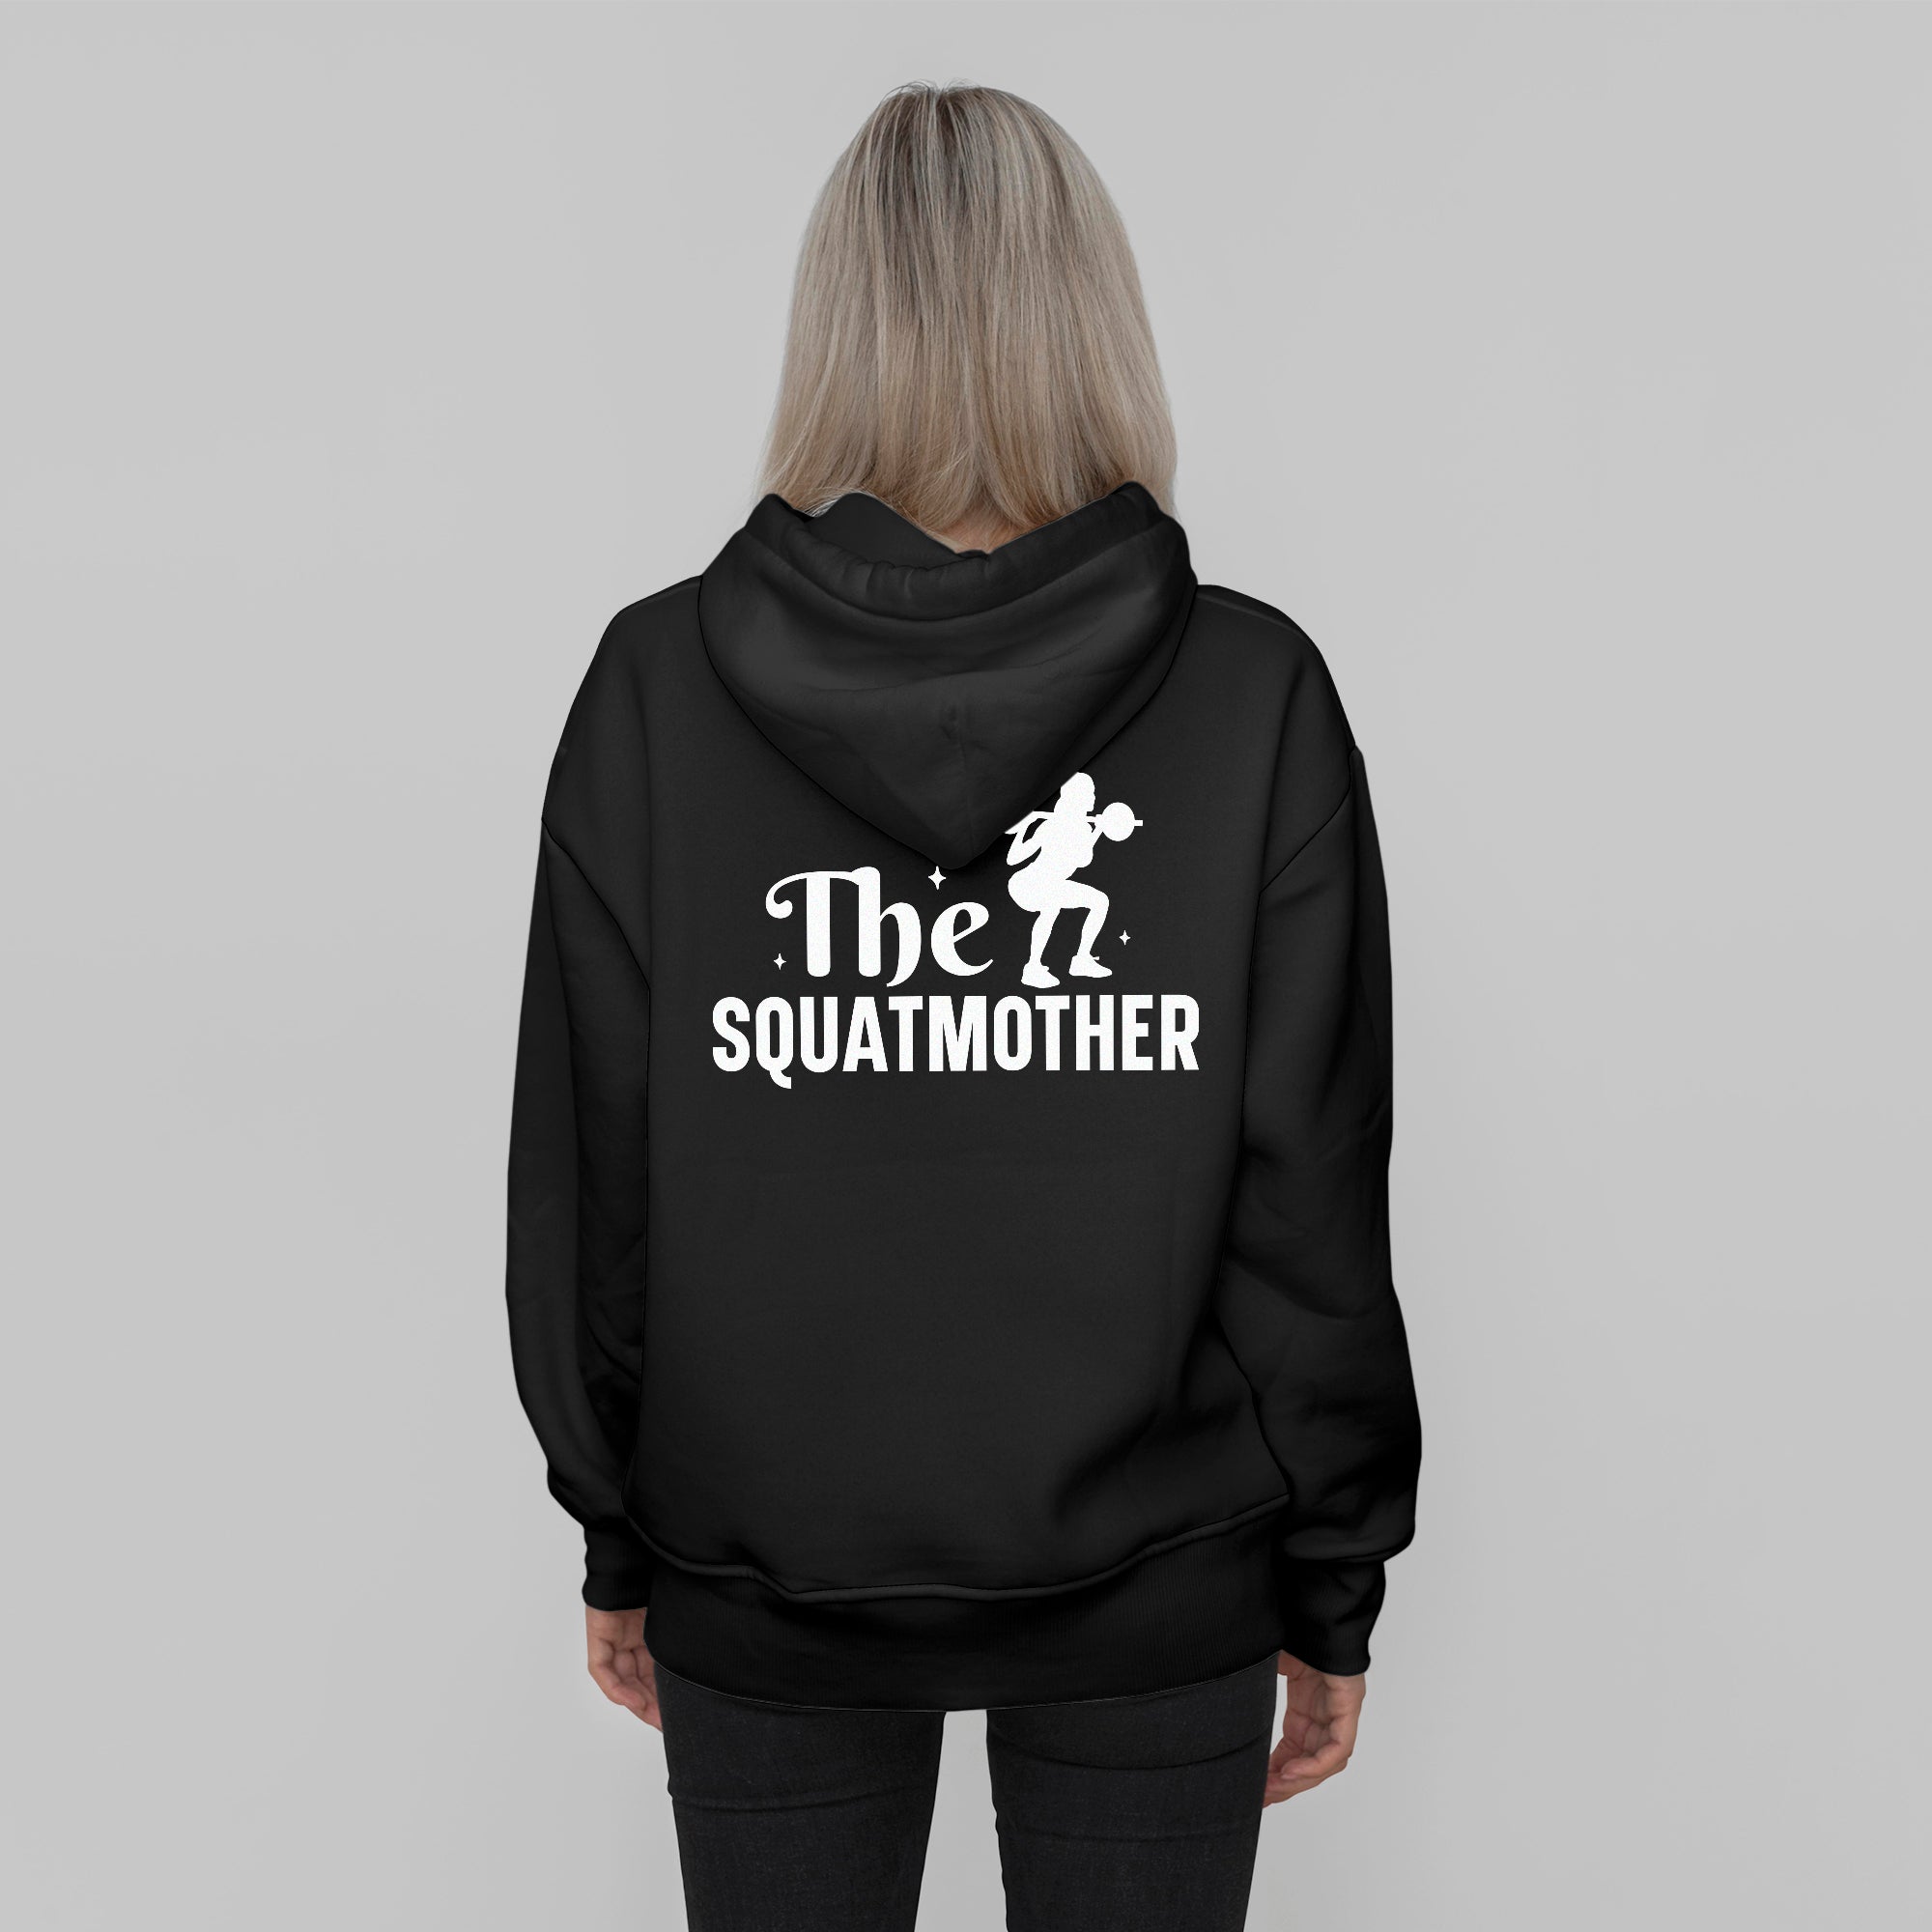 'The Squatmother' Hoodie